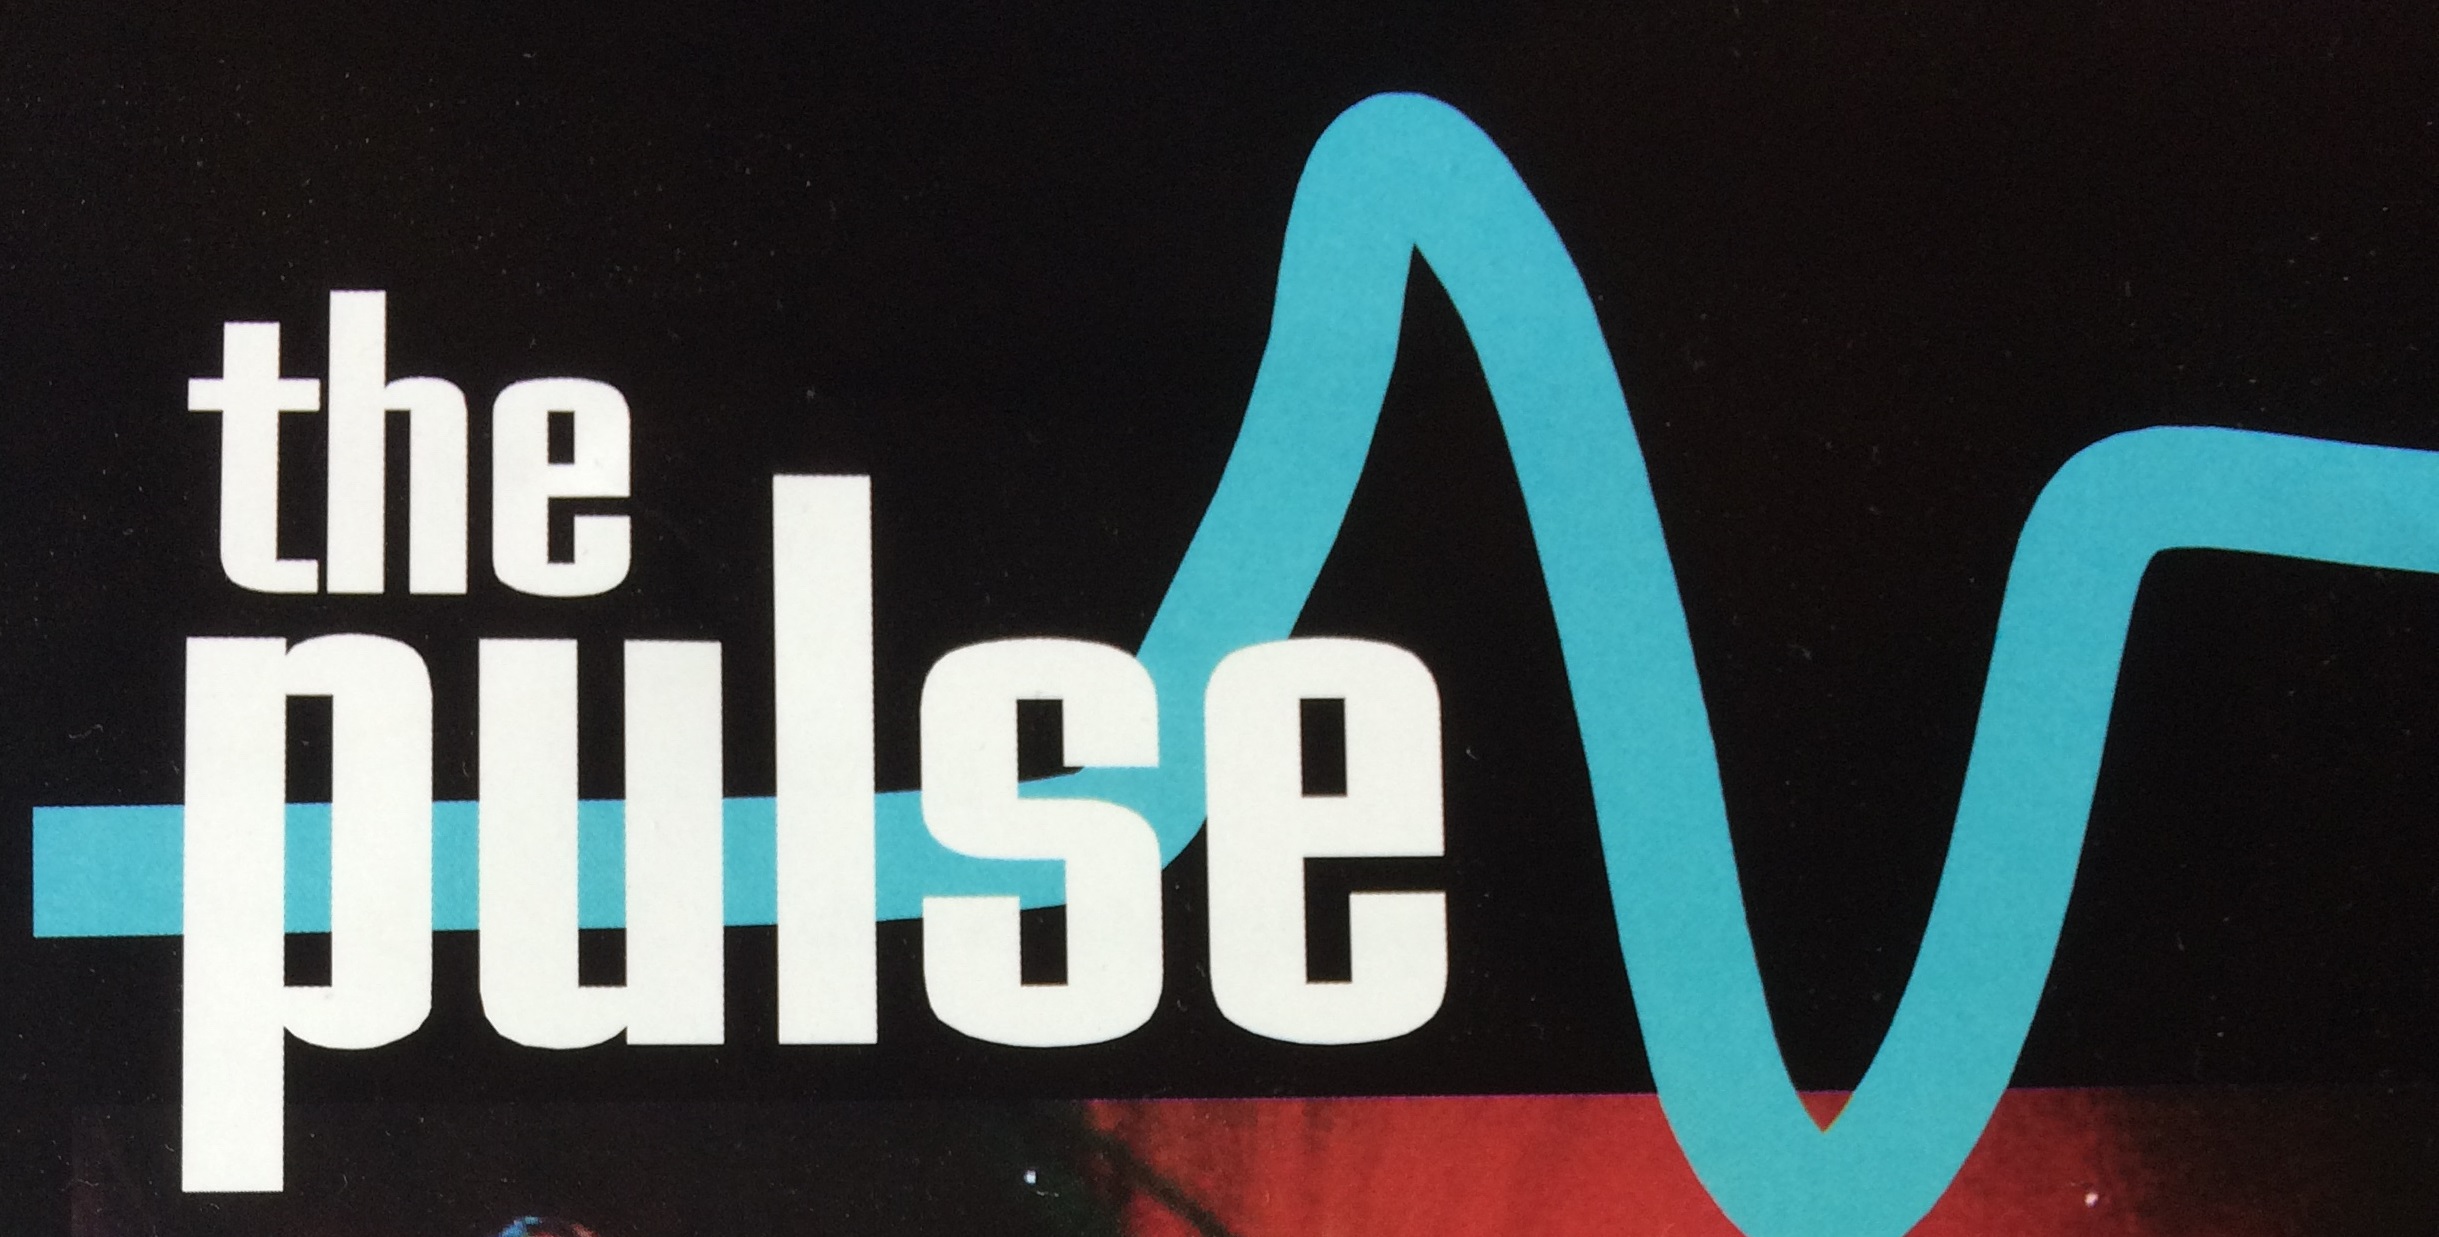 The pulse band